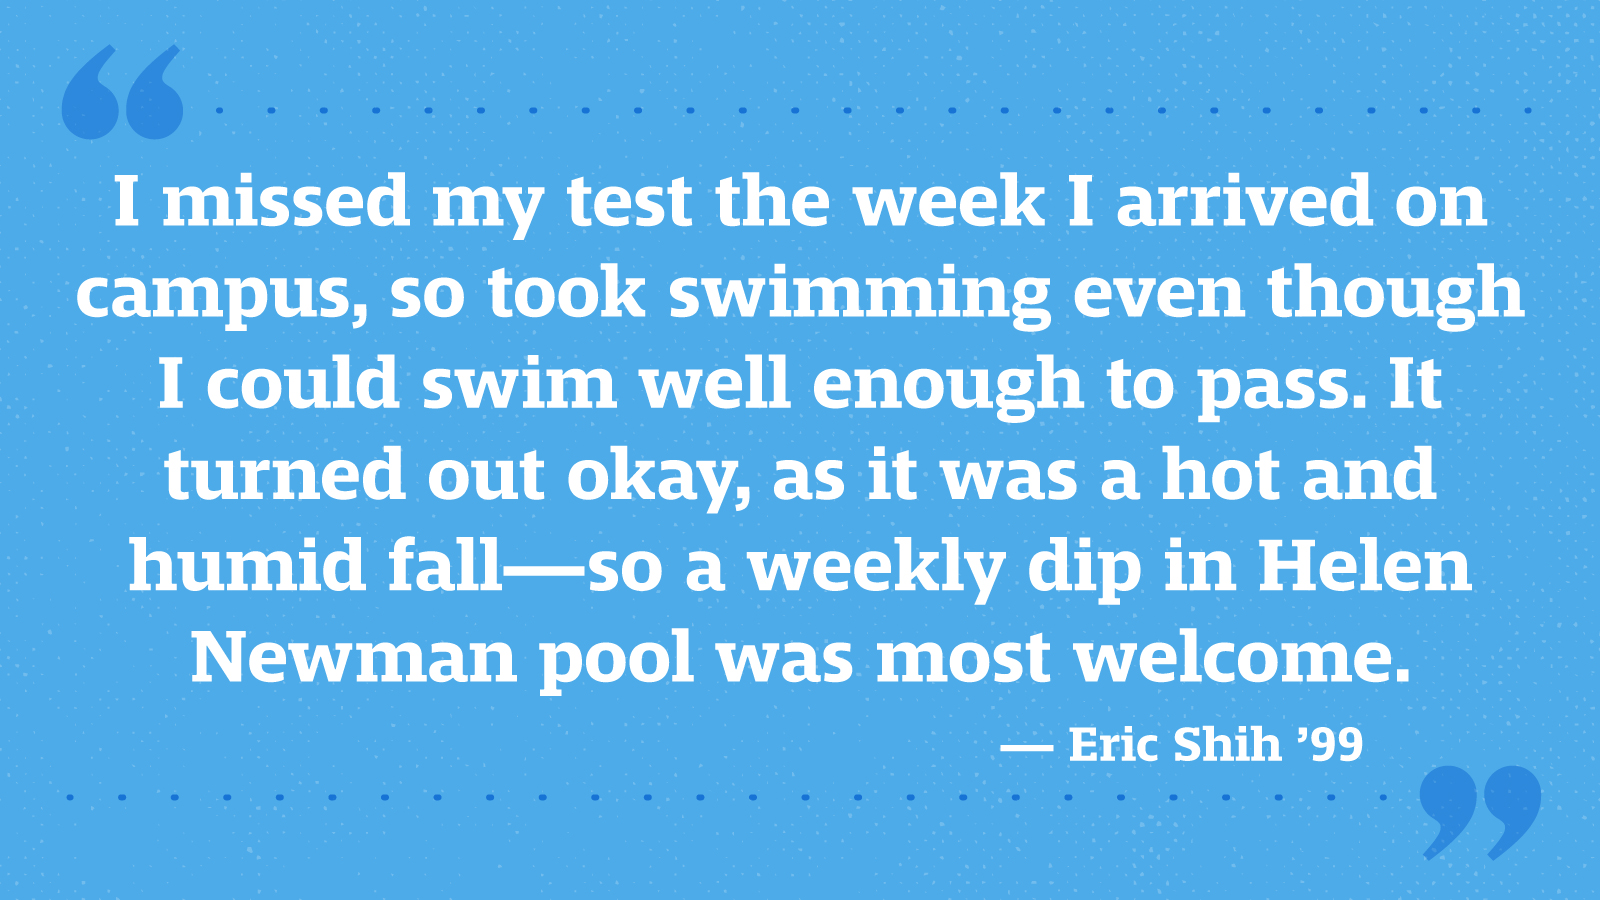 I missed my test the week I arrived on campus, so took swimming even though I could swim well enough to pass. It turned out okay, as it was a hot and humid fall—so a weekly dip in Helen Newman pool was most welcome. — Eric Shih ’99